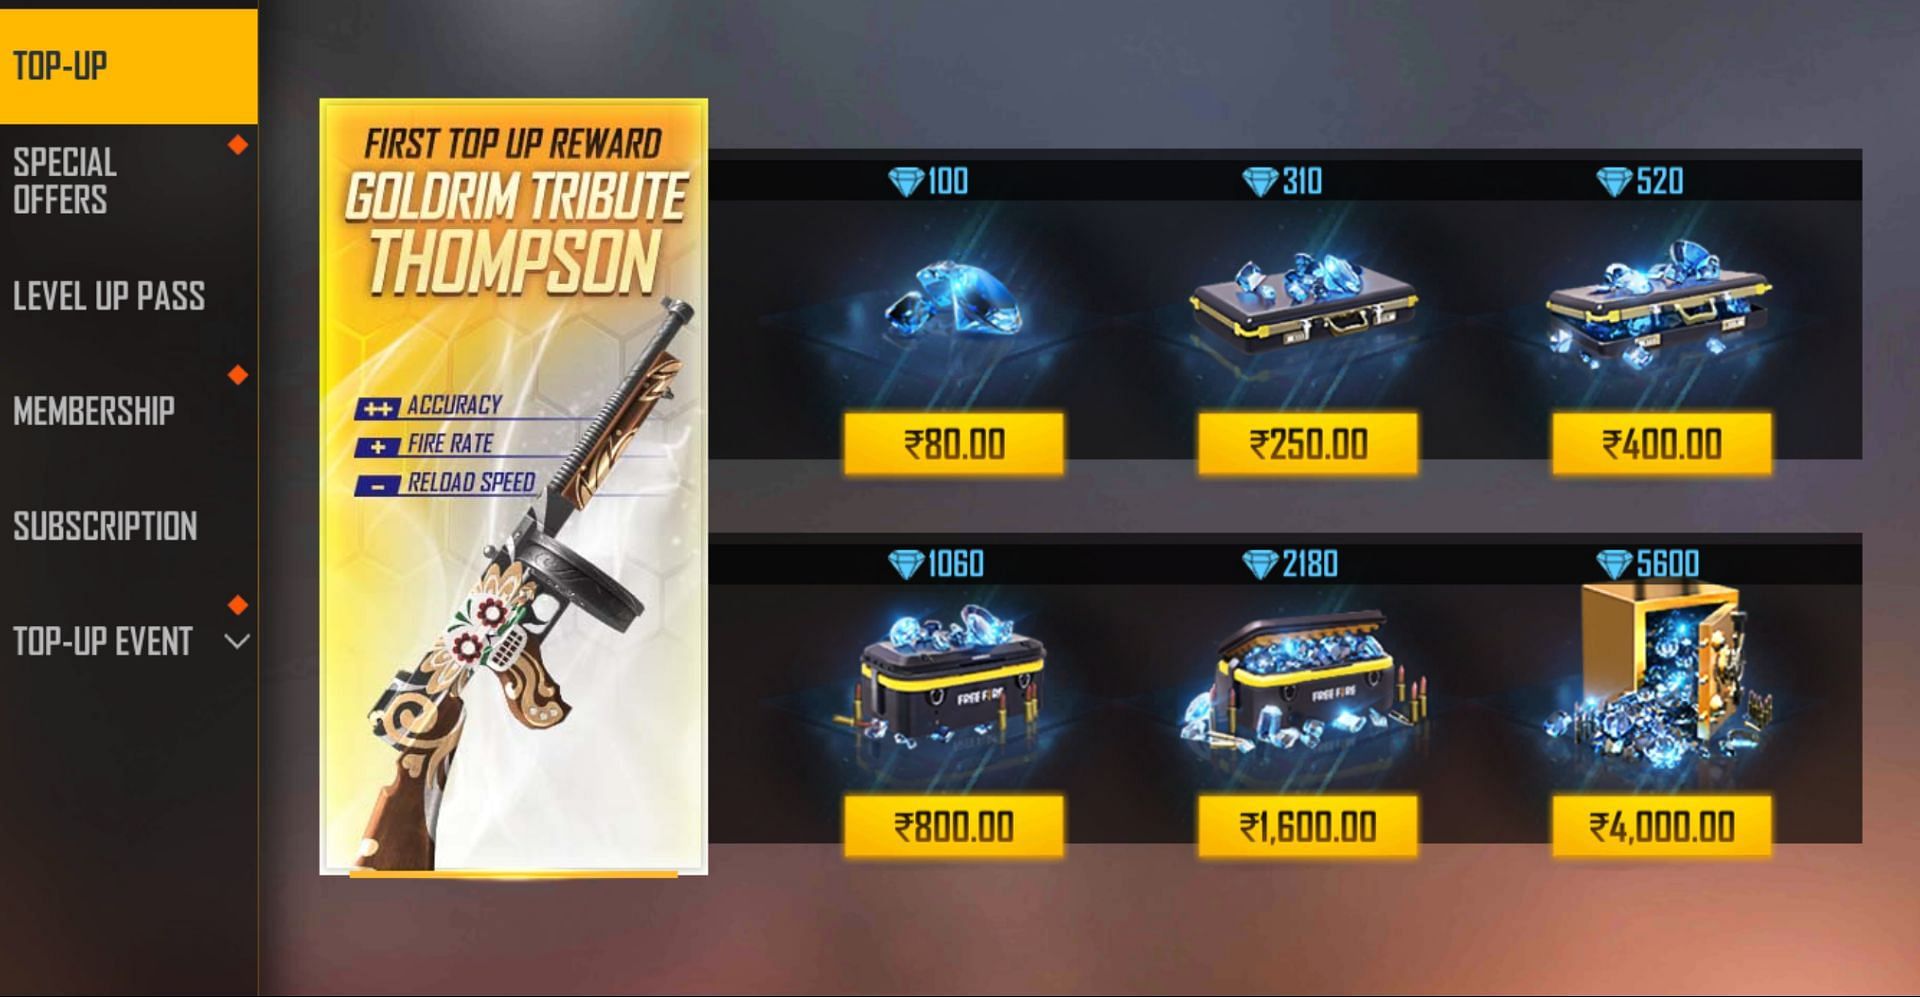 Gamers may acquire the pack of 520 diamonds to get both rewards (Image via Garena)